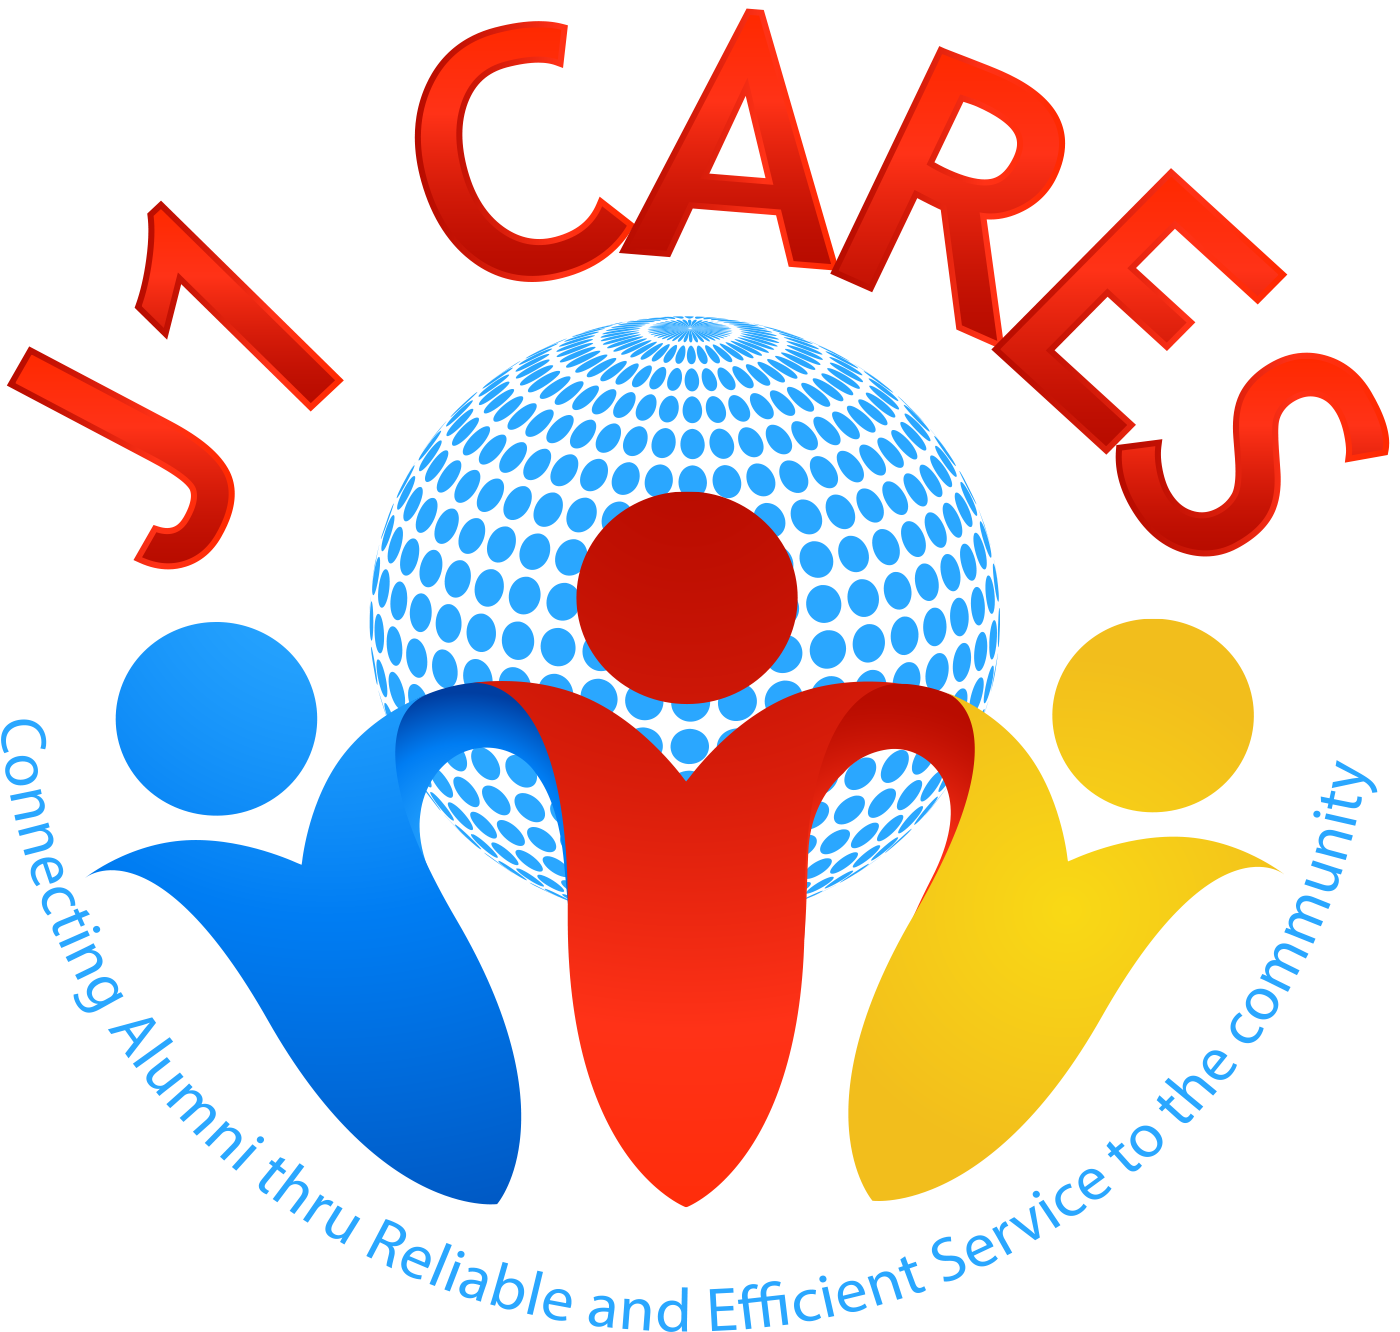 Image containing the logo of J1 CARES